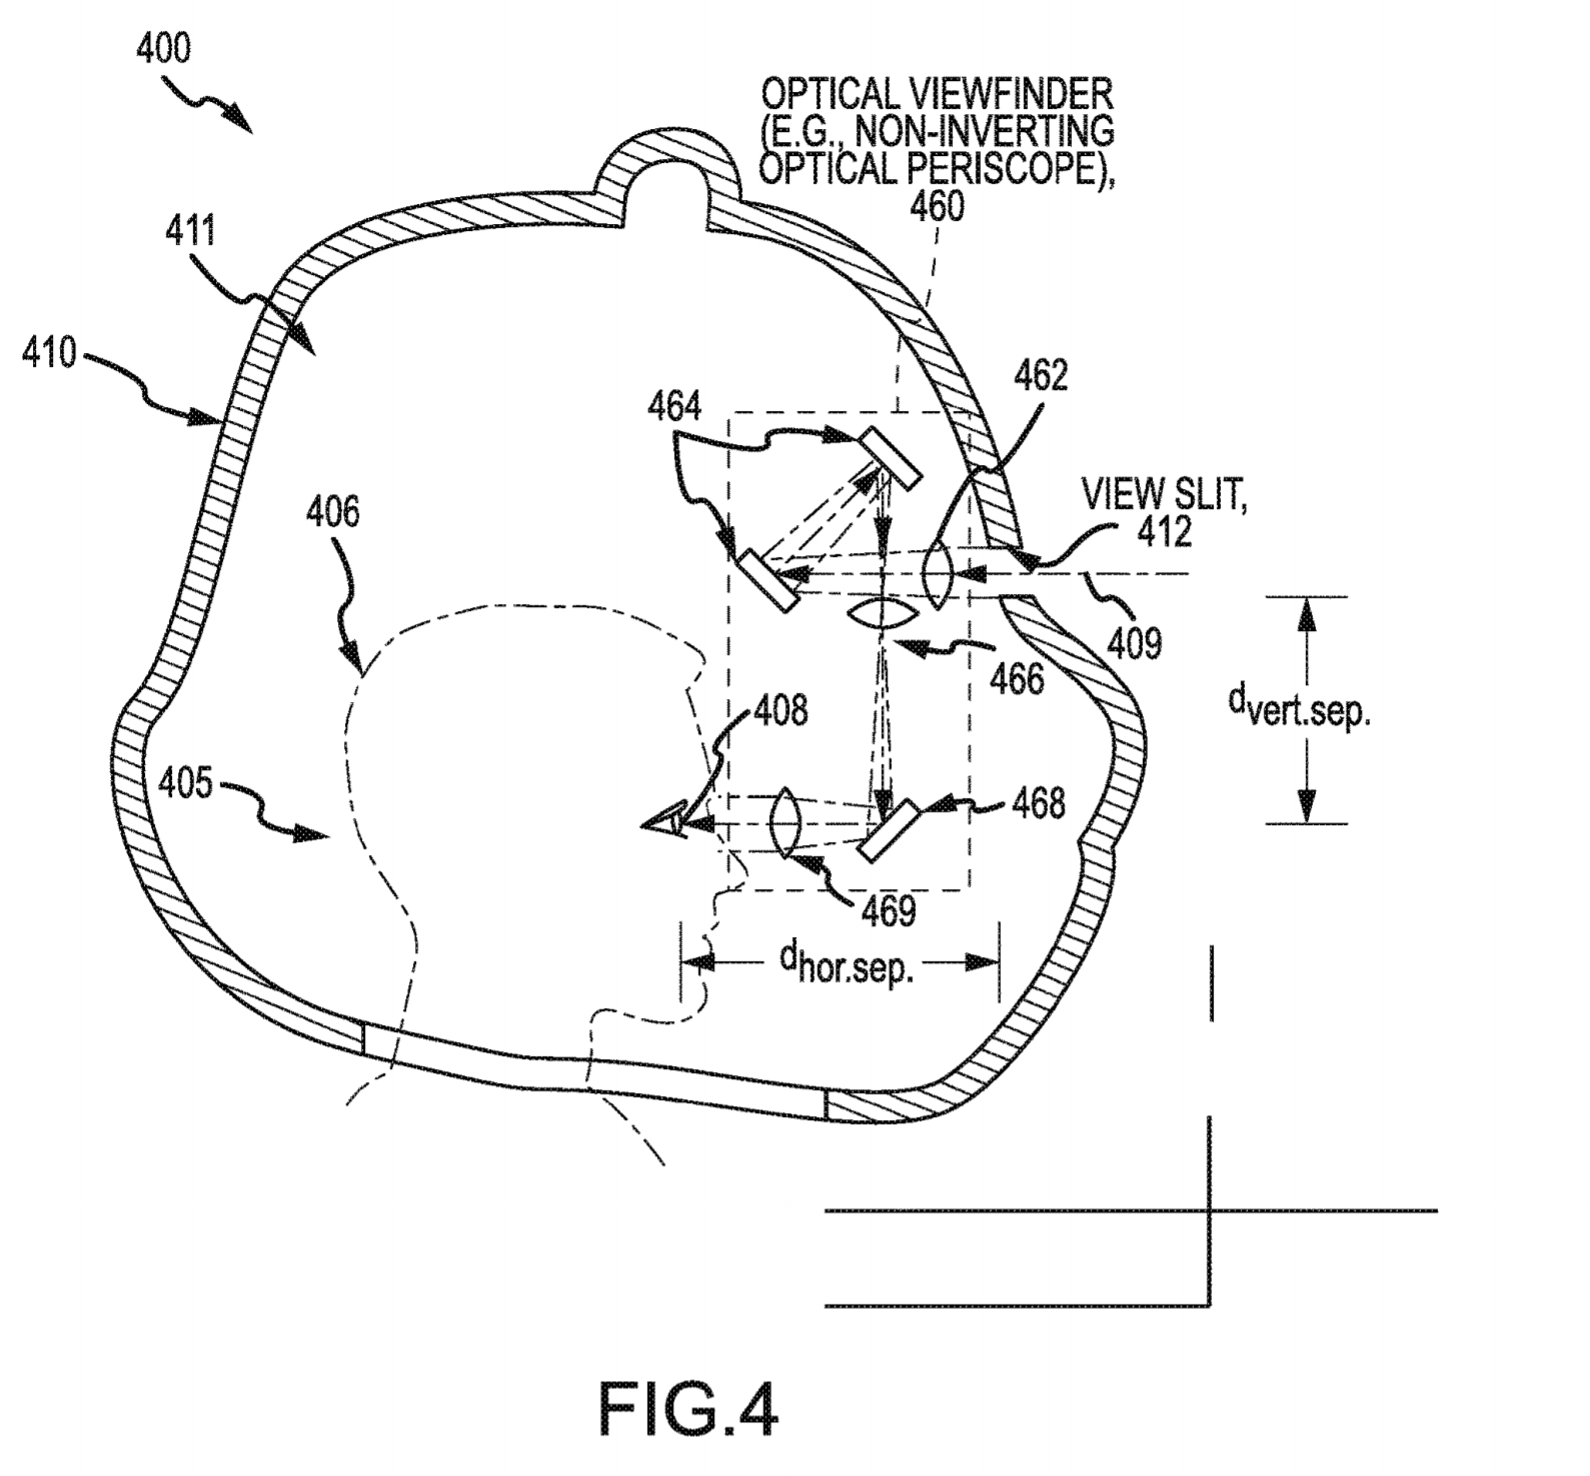 Interesting Patents: Disney’s Optical Viewfinder for Characters